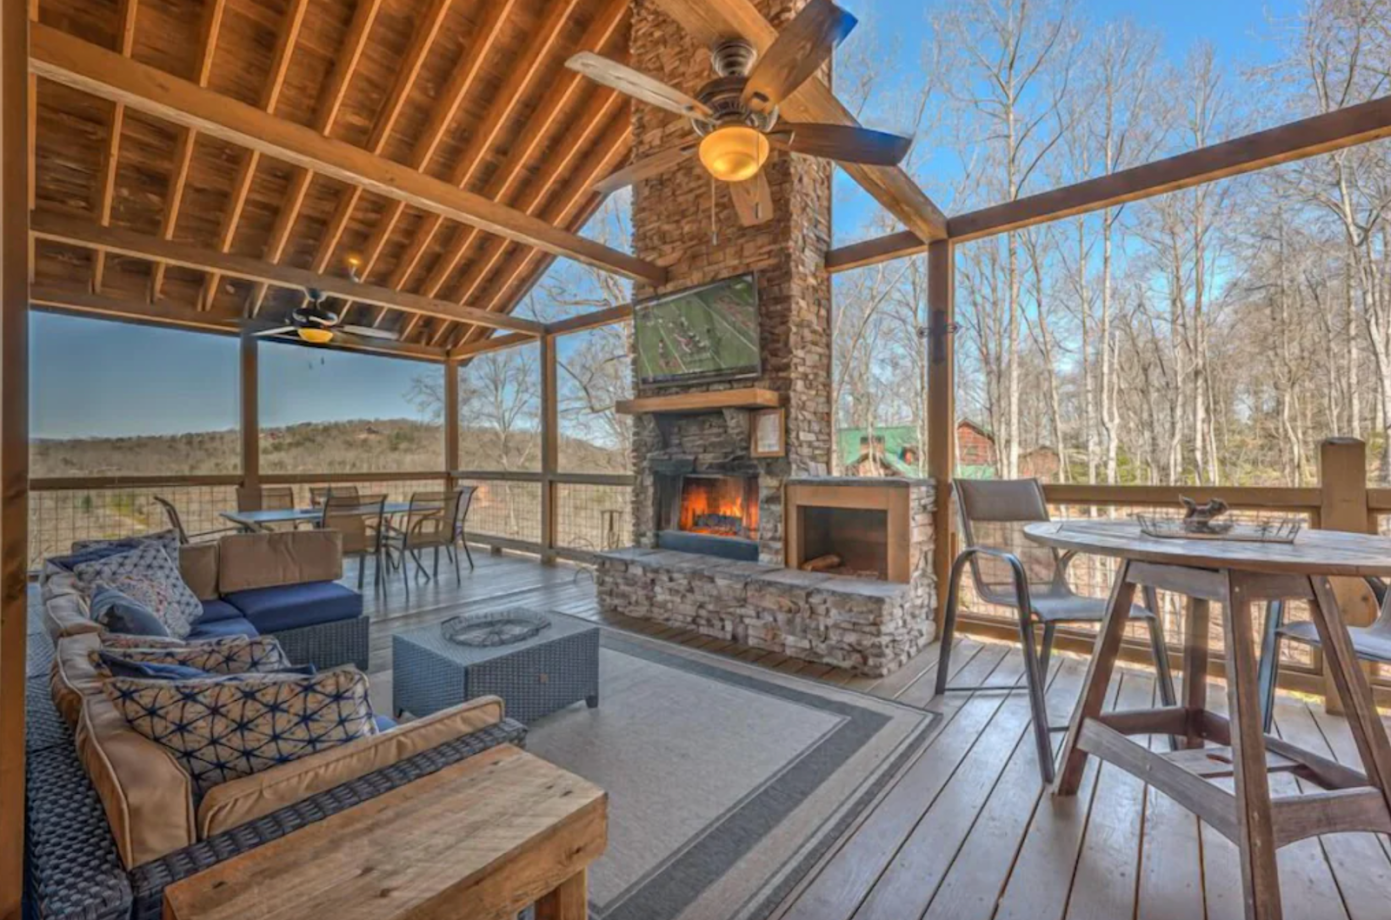 Georgia cabin vrbo deck fireplace with tv over it